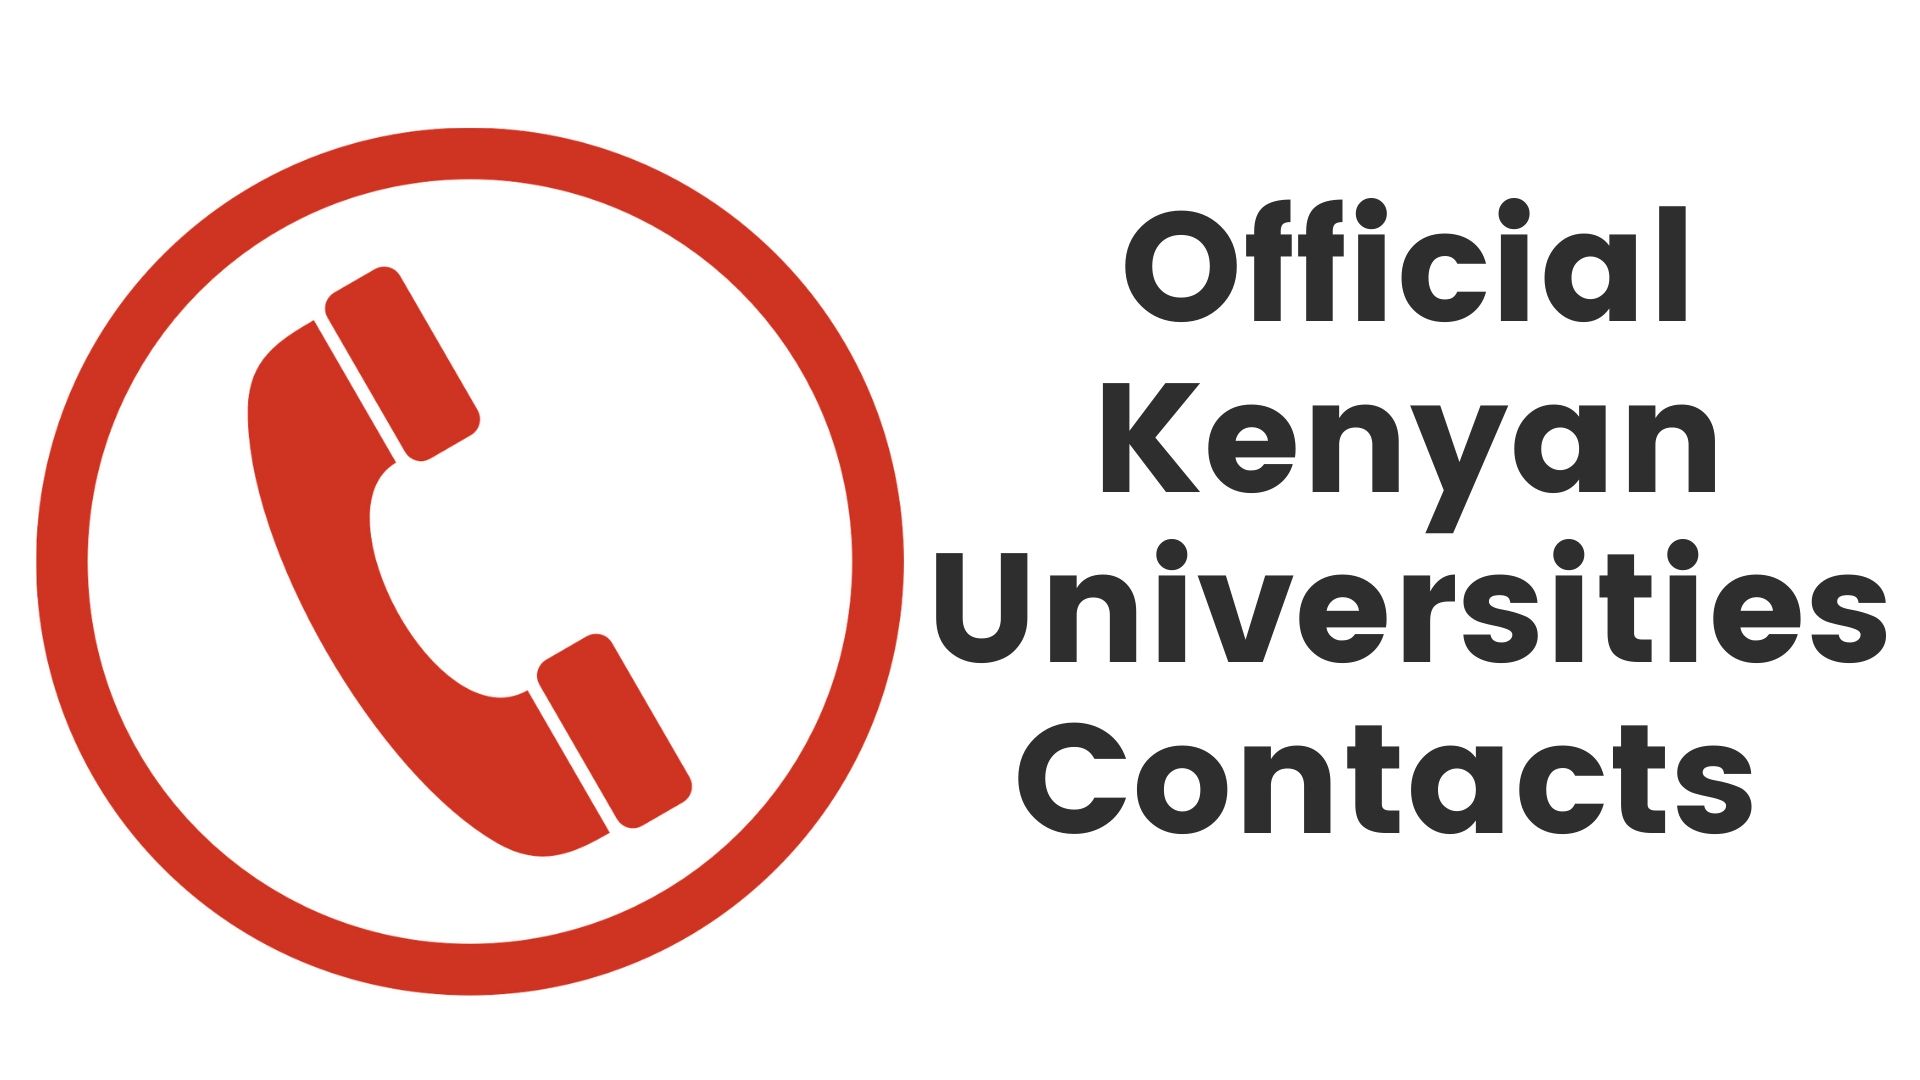 Official university Telephone contacts in Kenya